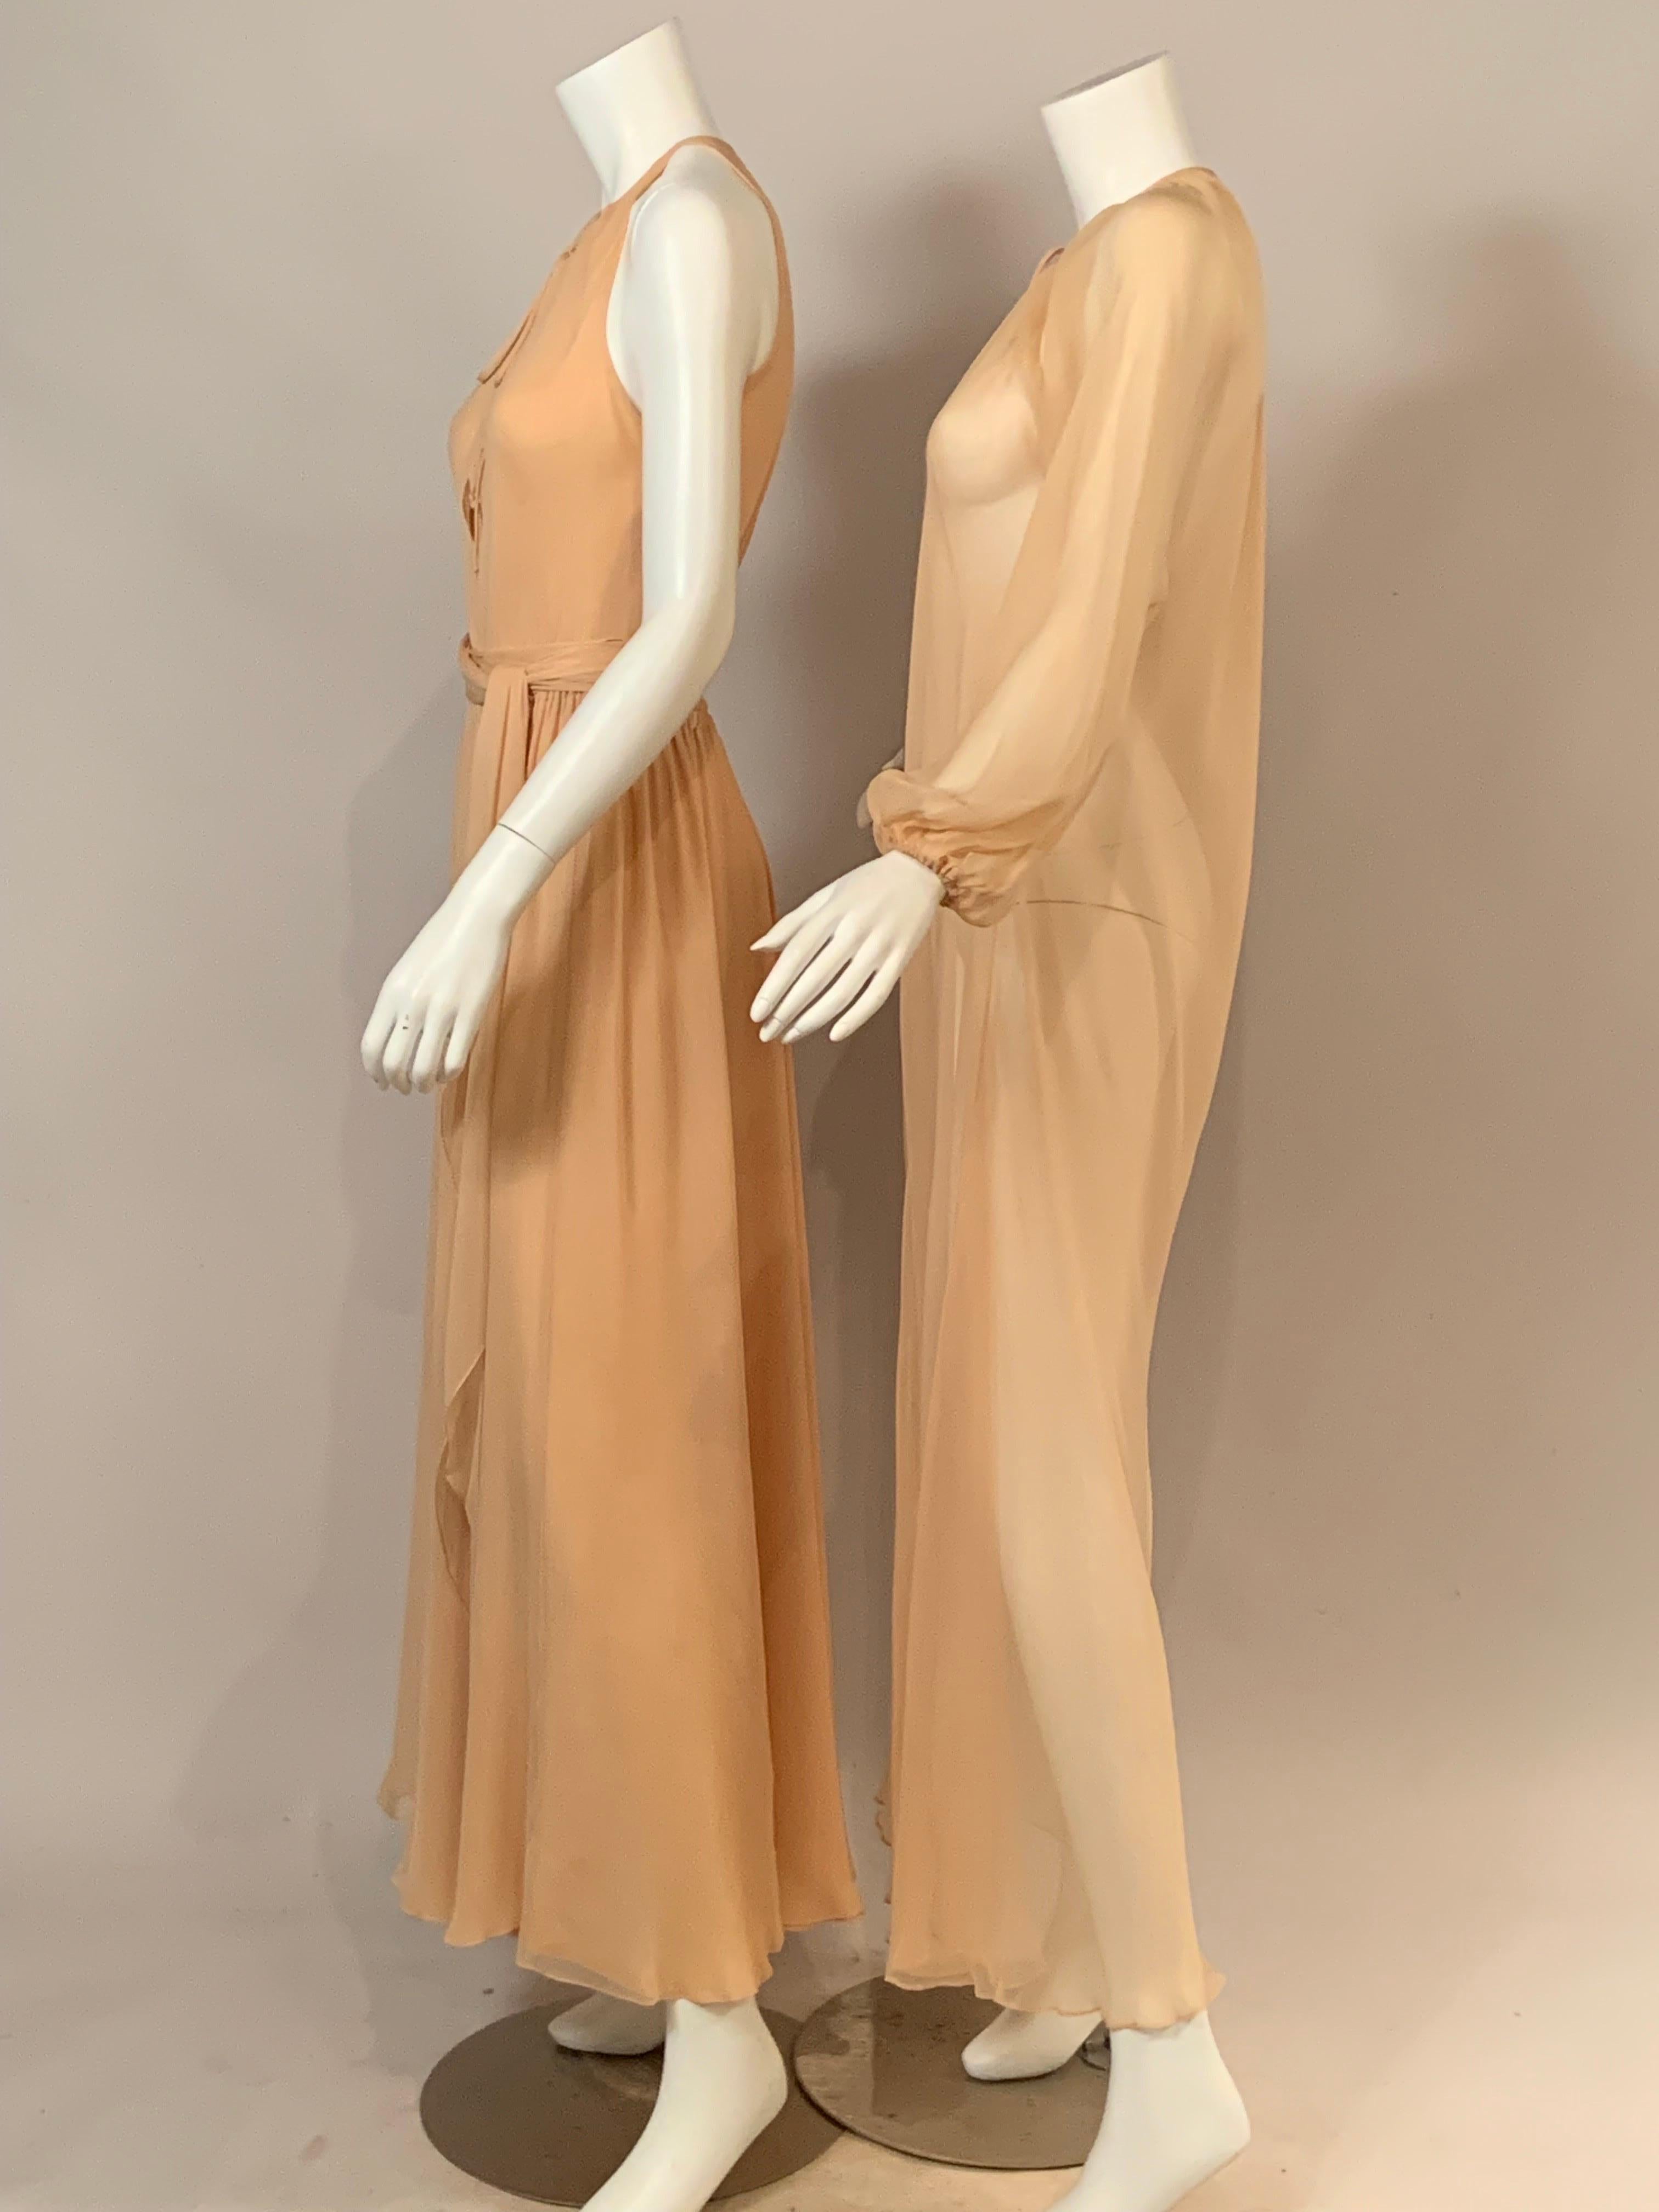 Halston Layered Chiffon Dress with Sash and Matching Sheer Chiffon Coat In Excellent Condition For Sale In New Hope, PA